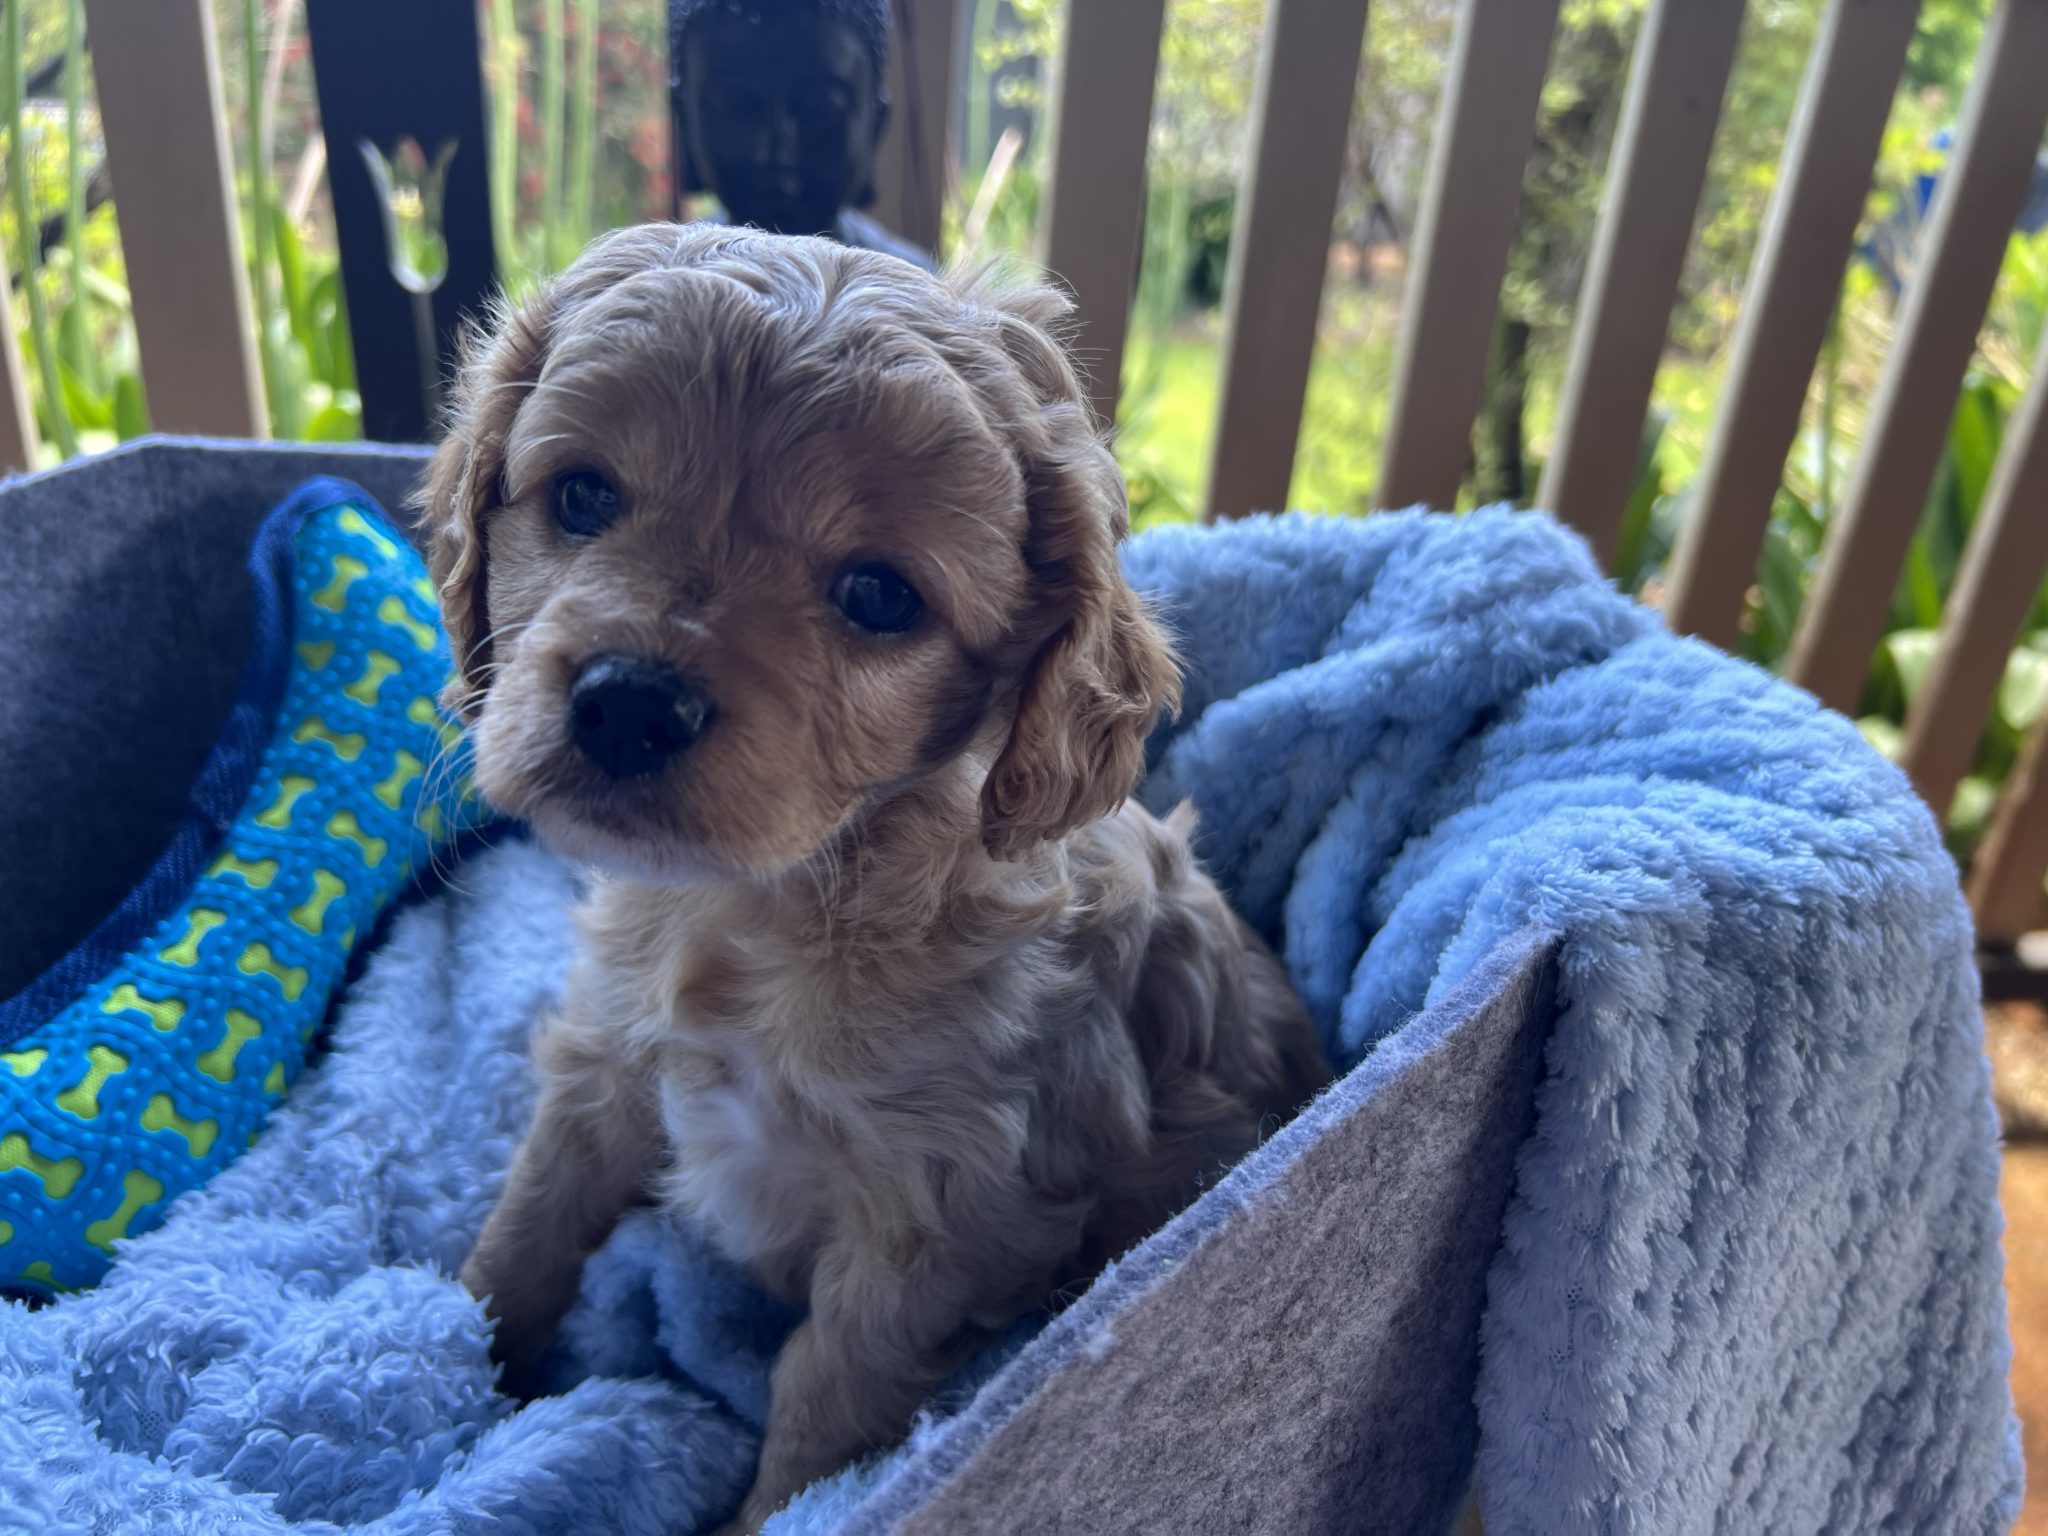 Arloquin Cavoodles/Theodores are happy to announce